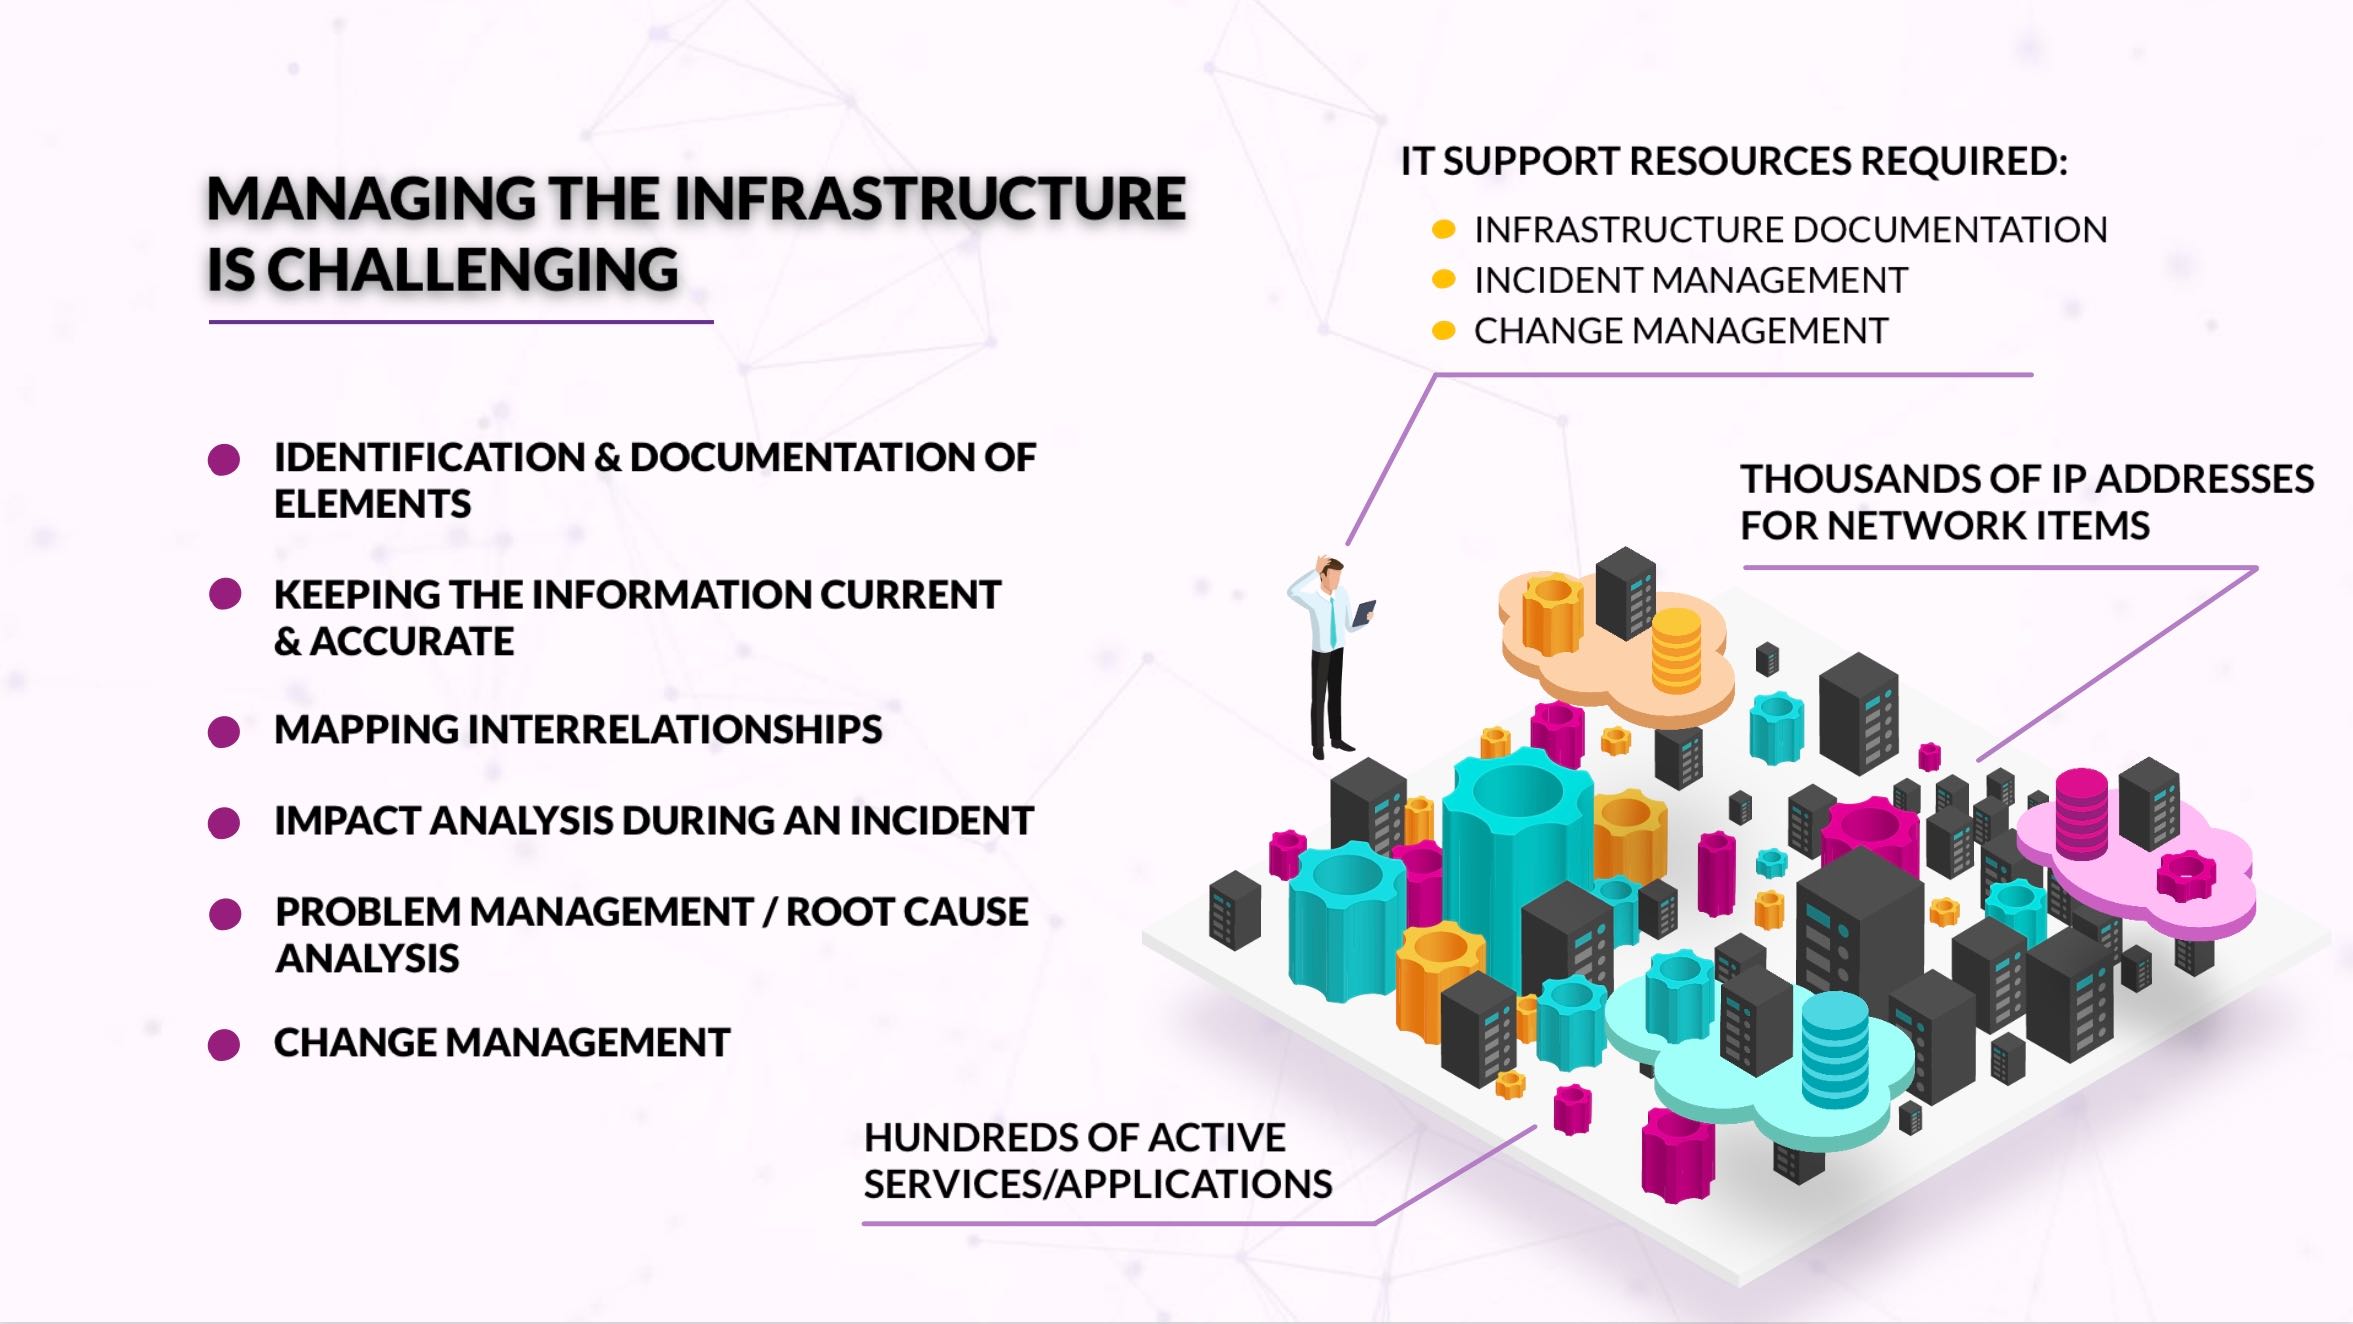 Managing the infrastructure is challenging